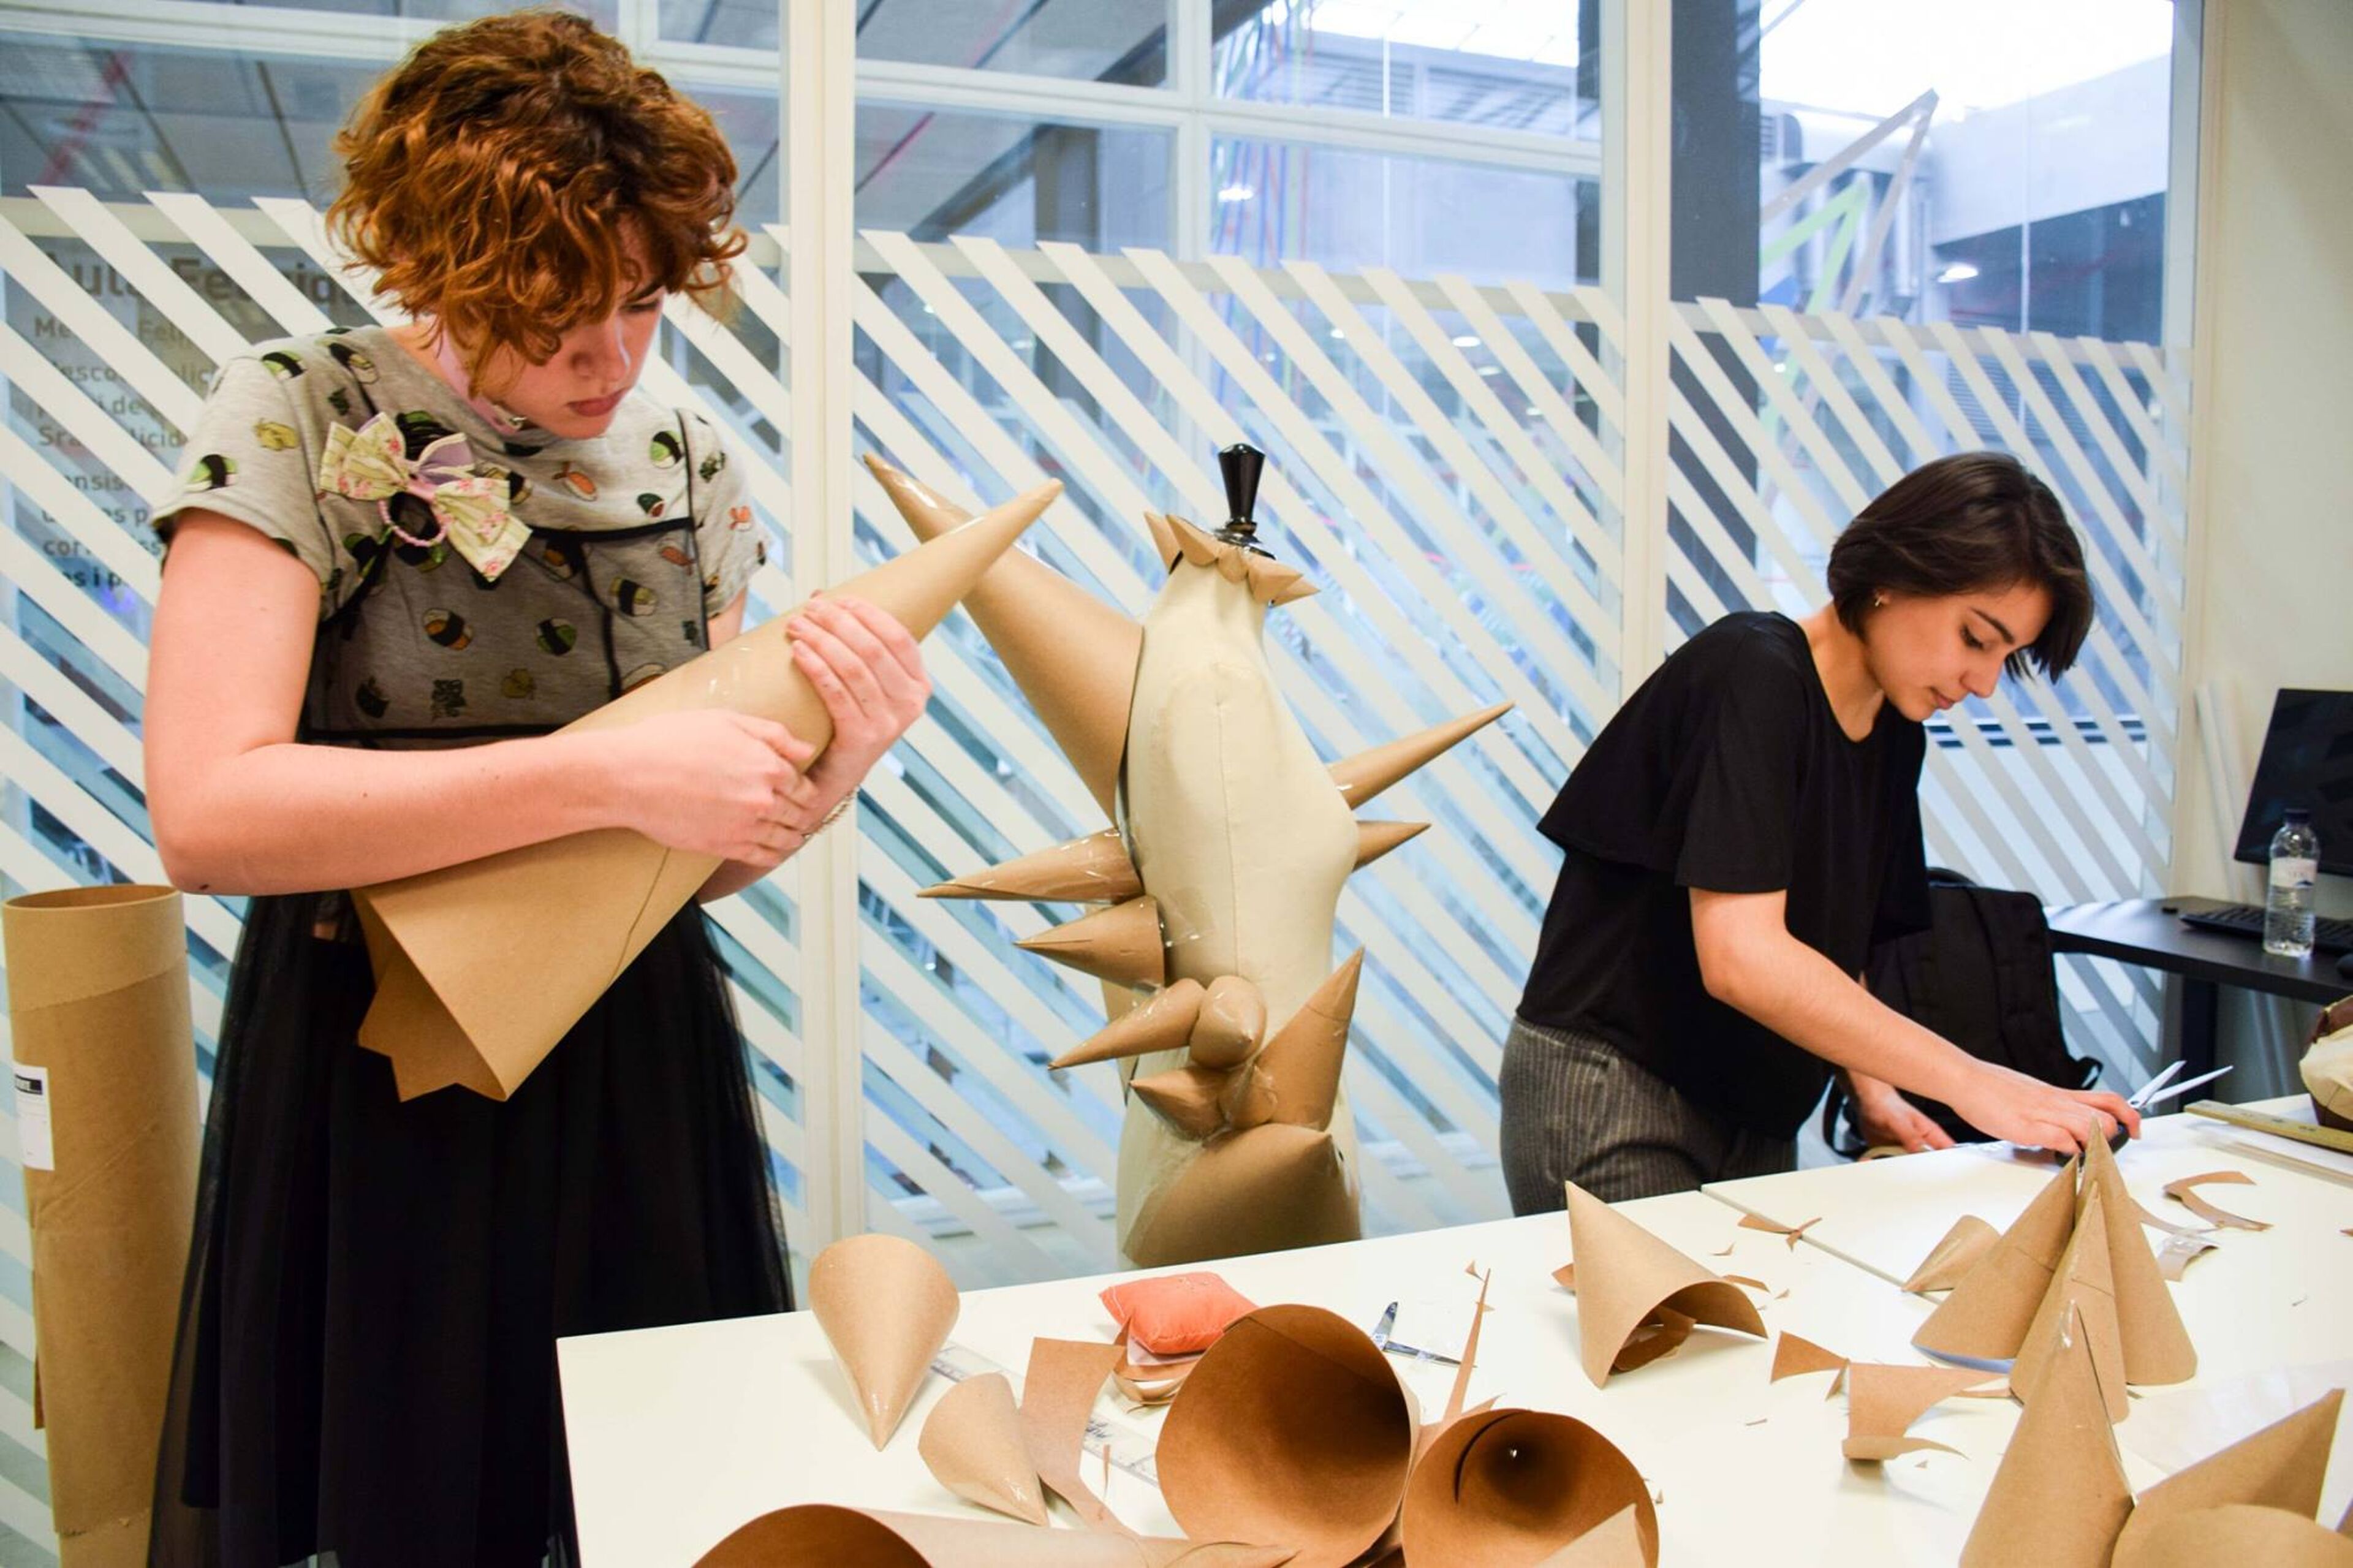 Two art students are engaged in creating sculptures from cardboard, focusing intently on their work.